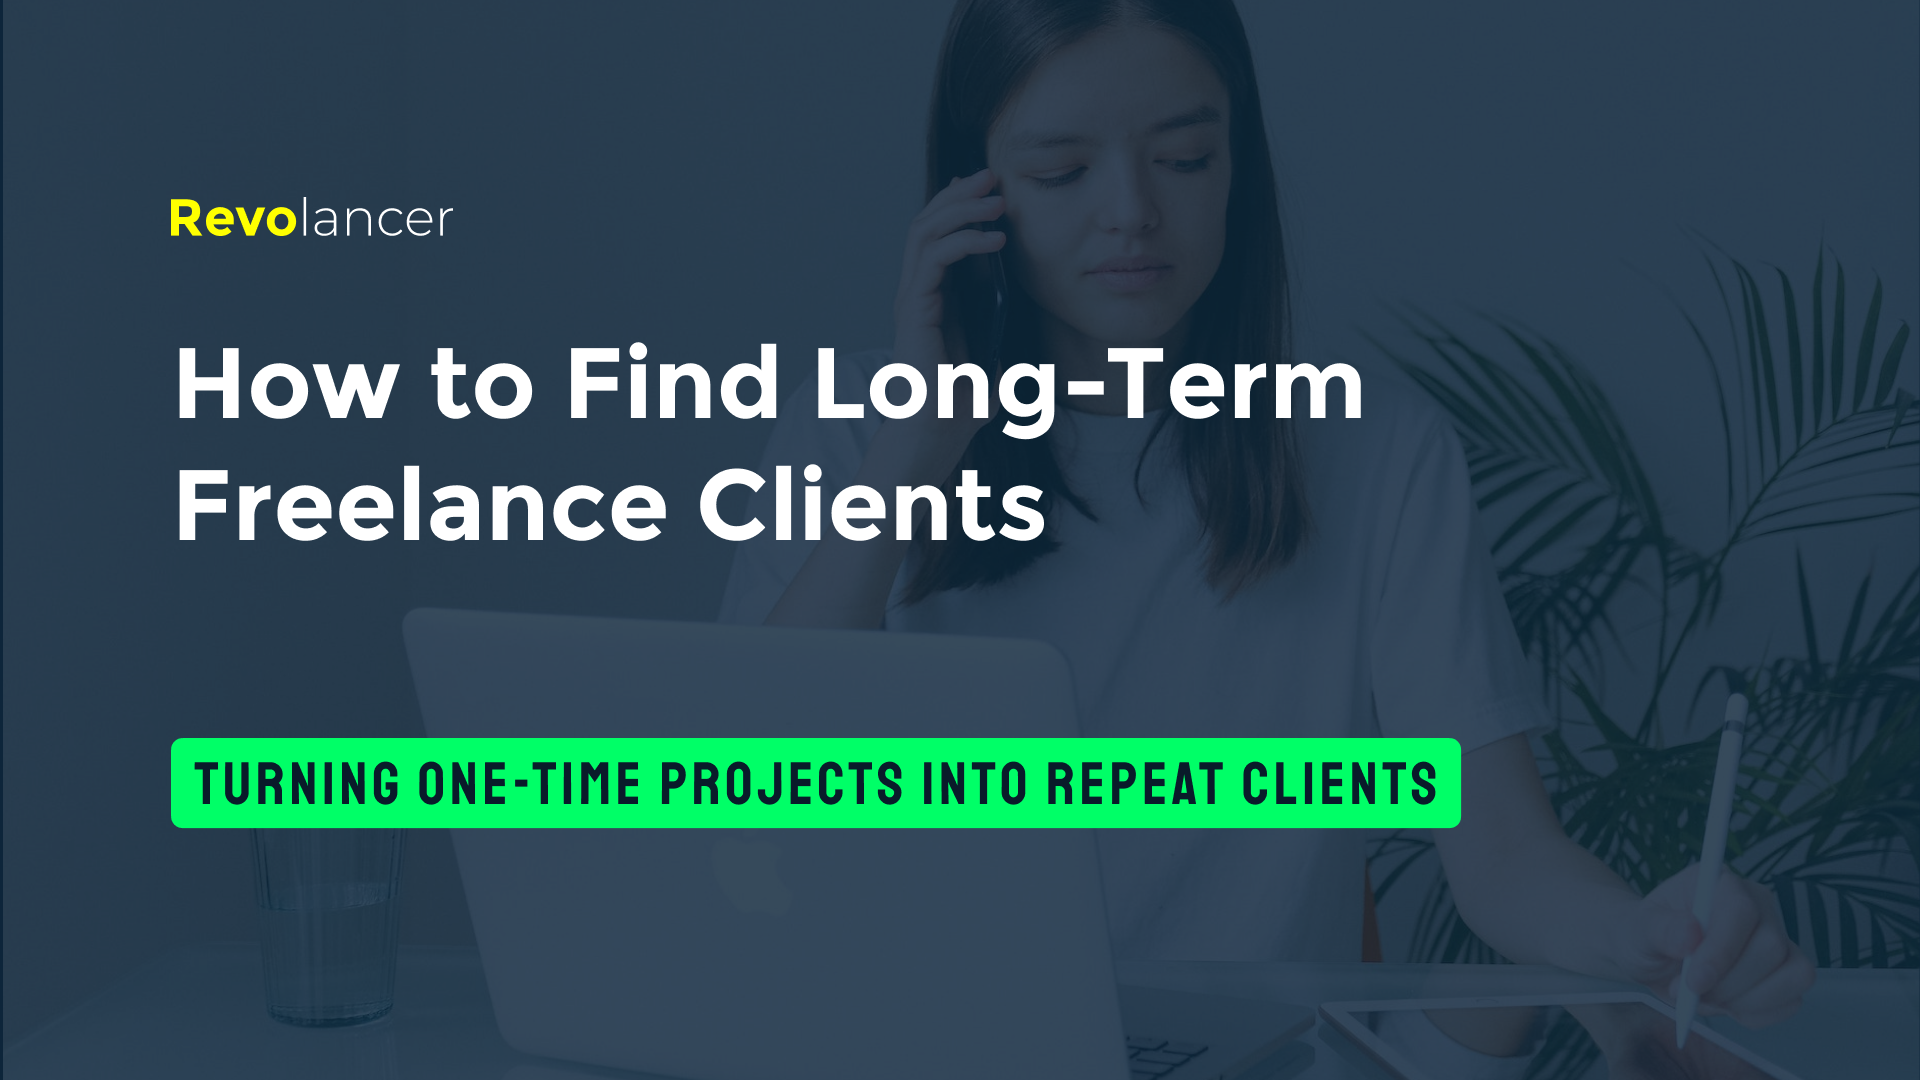 How to find long-term freelance clients?